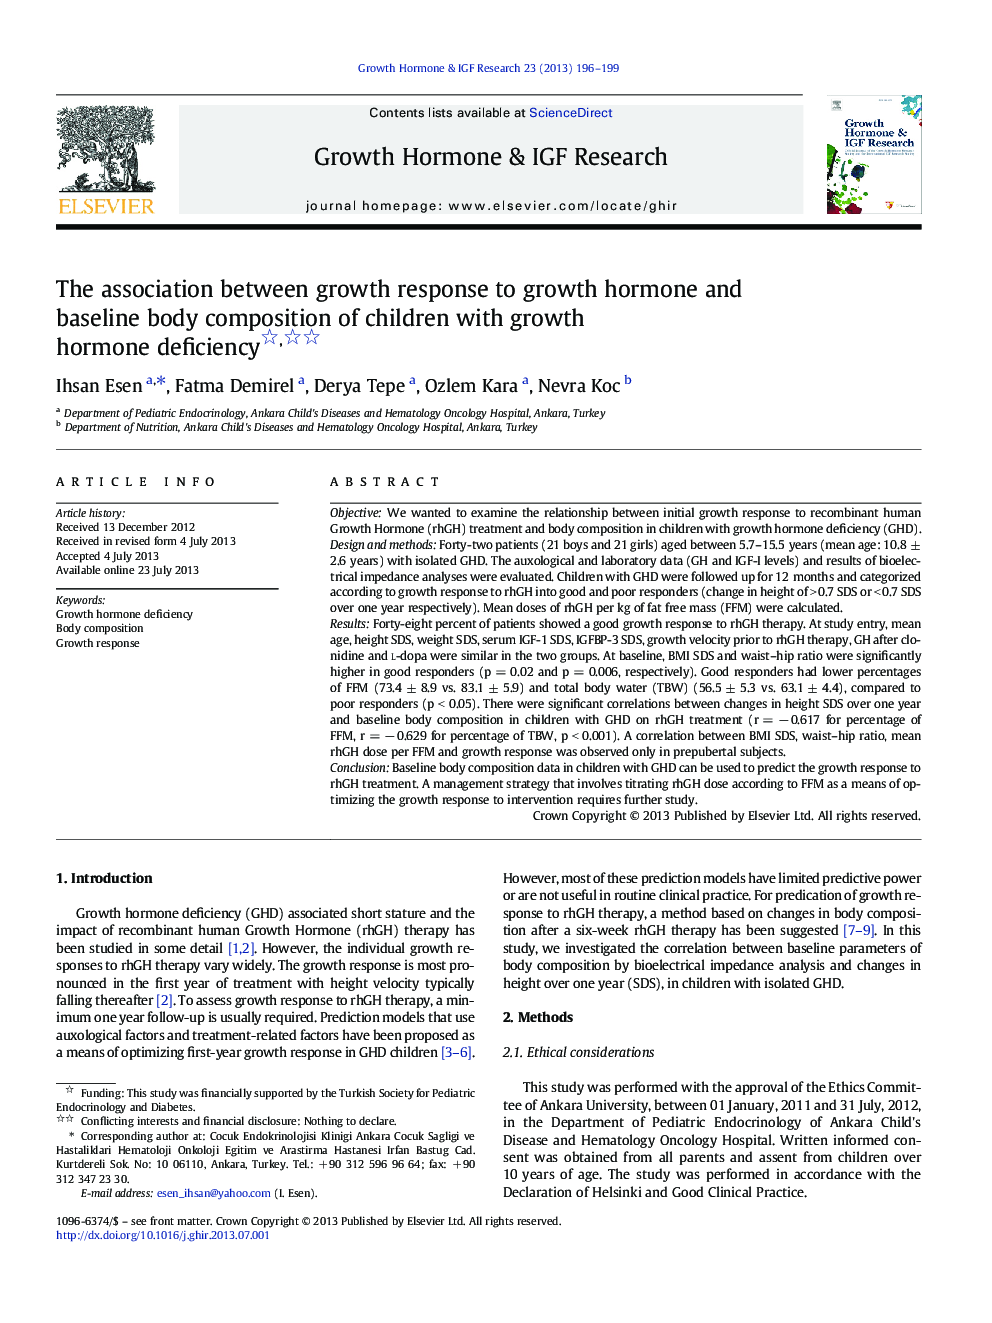 The association between growth response to growth hormone and baseline body composition of children with growth hormone deficiency 